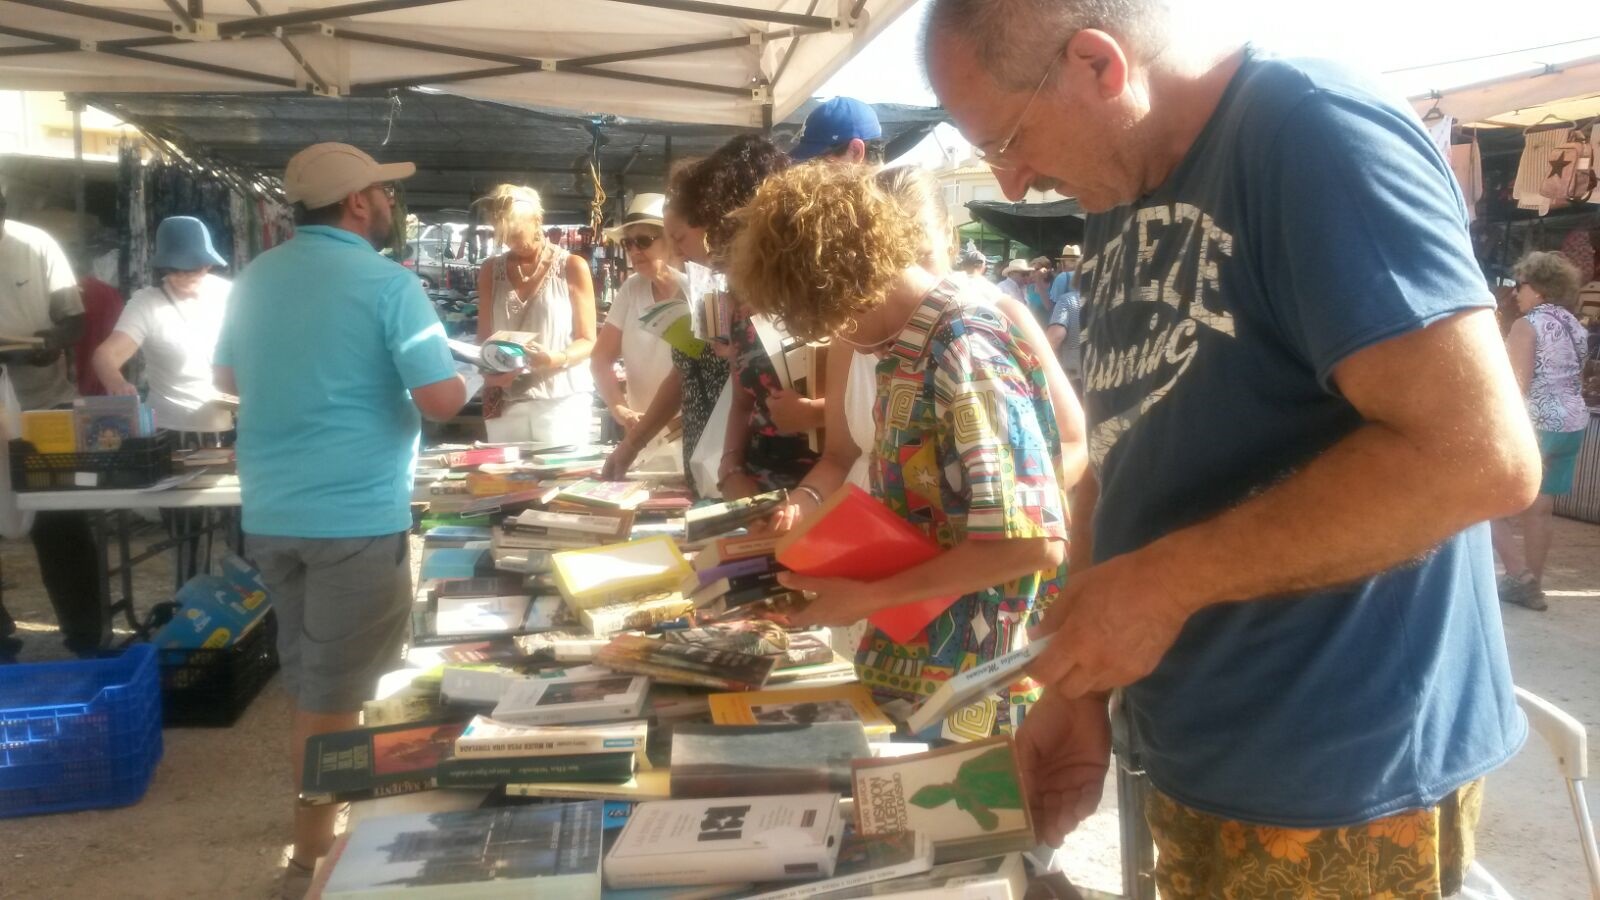 BOOK MARKET. Come for your free book